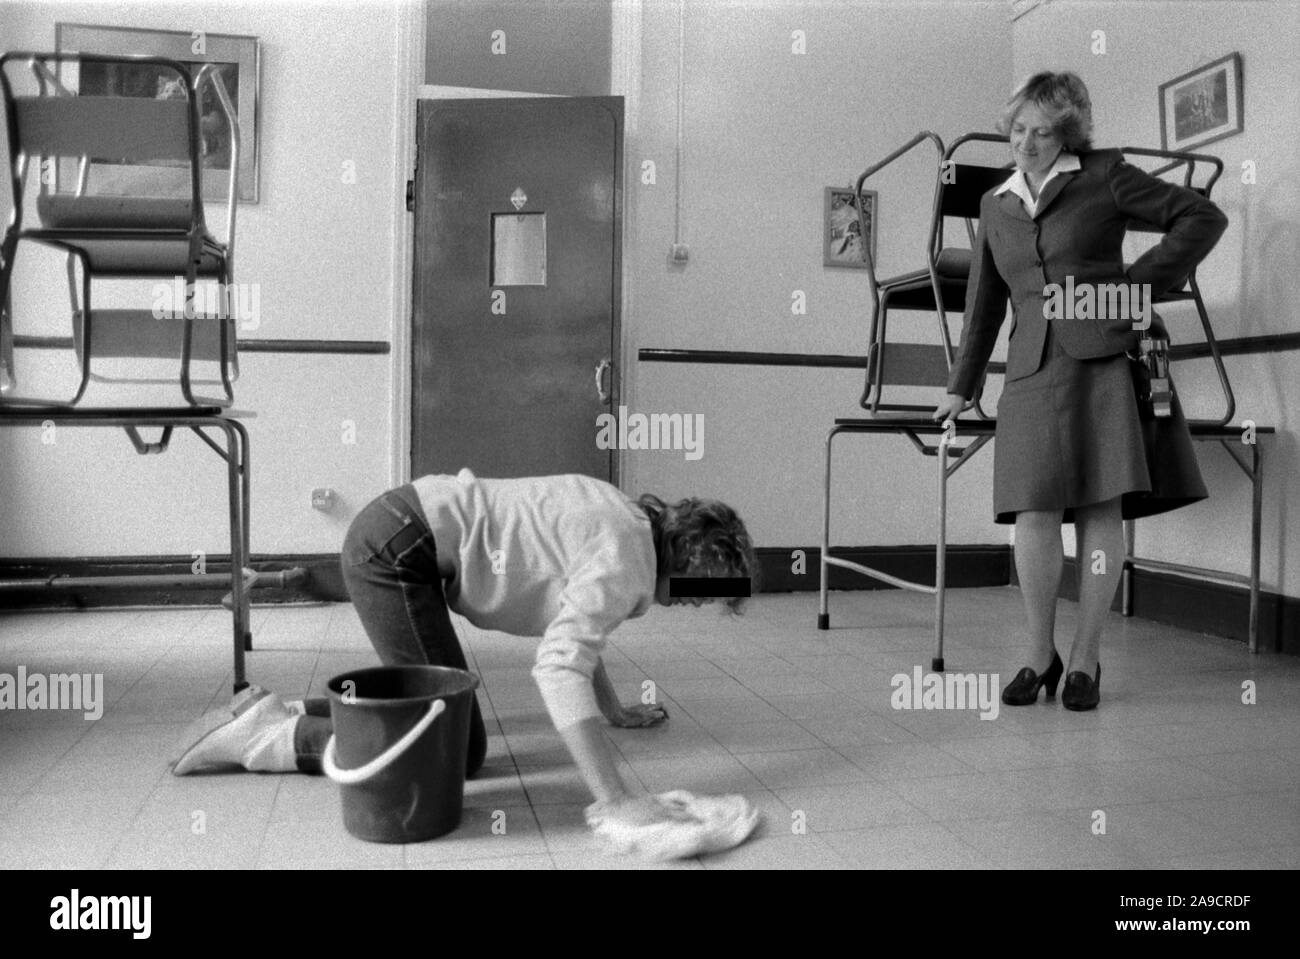 HM Prison Styal Wilmslow Cheshire UK 1980s. Female Inmate womens prison, prison guard the officer standing over female prisoner who is cleaning the floor.  Cheshire 1986 England HOMER SYKES Stock Photo